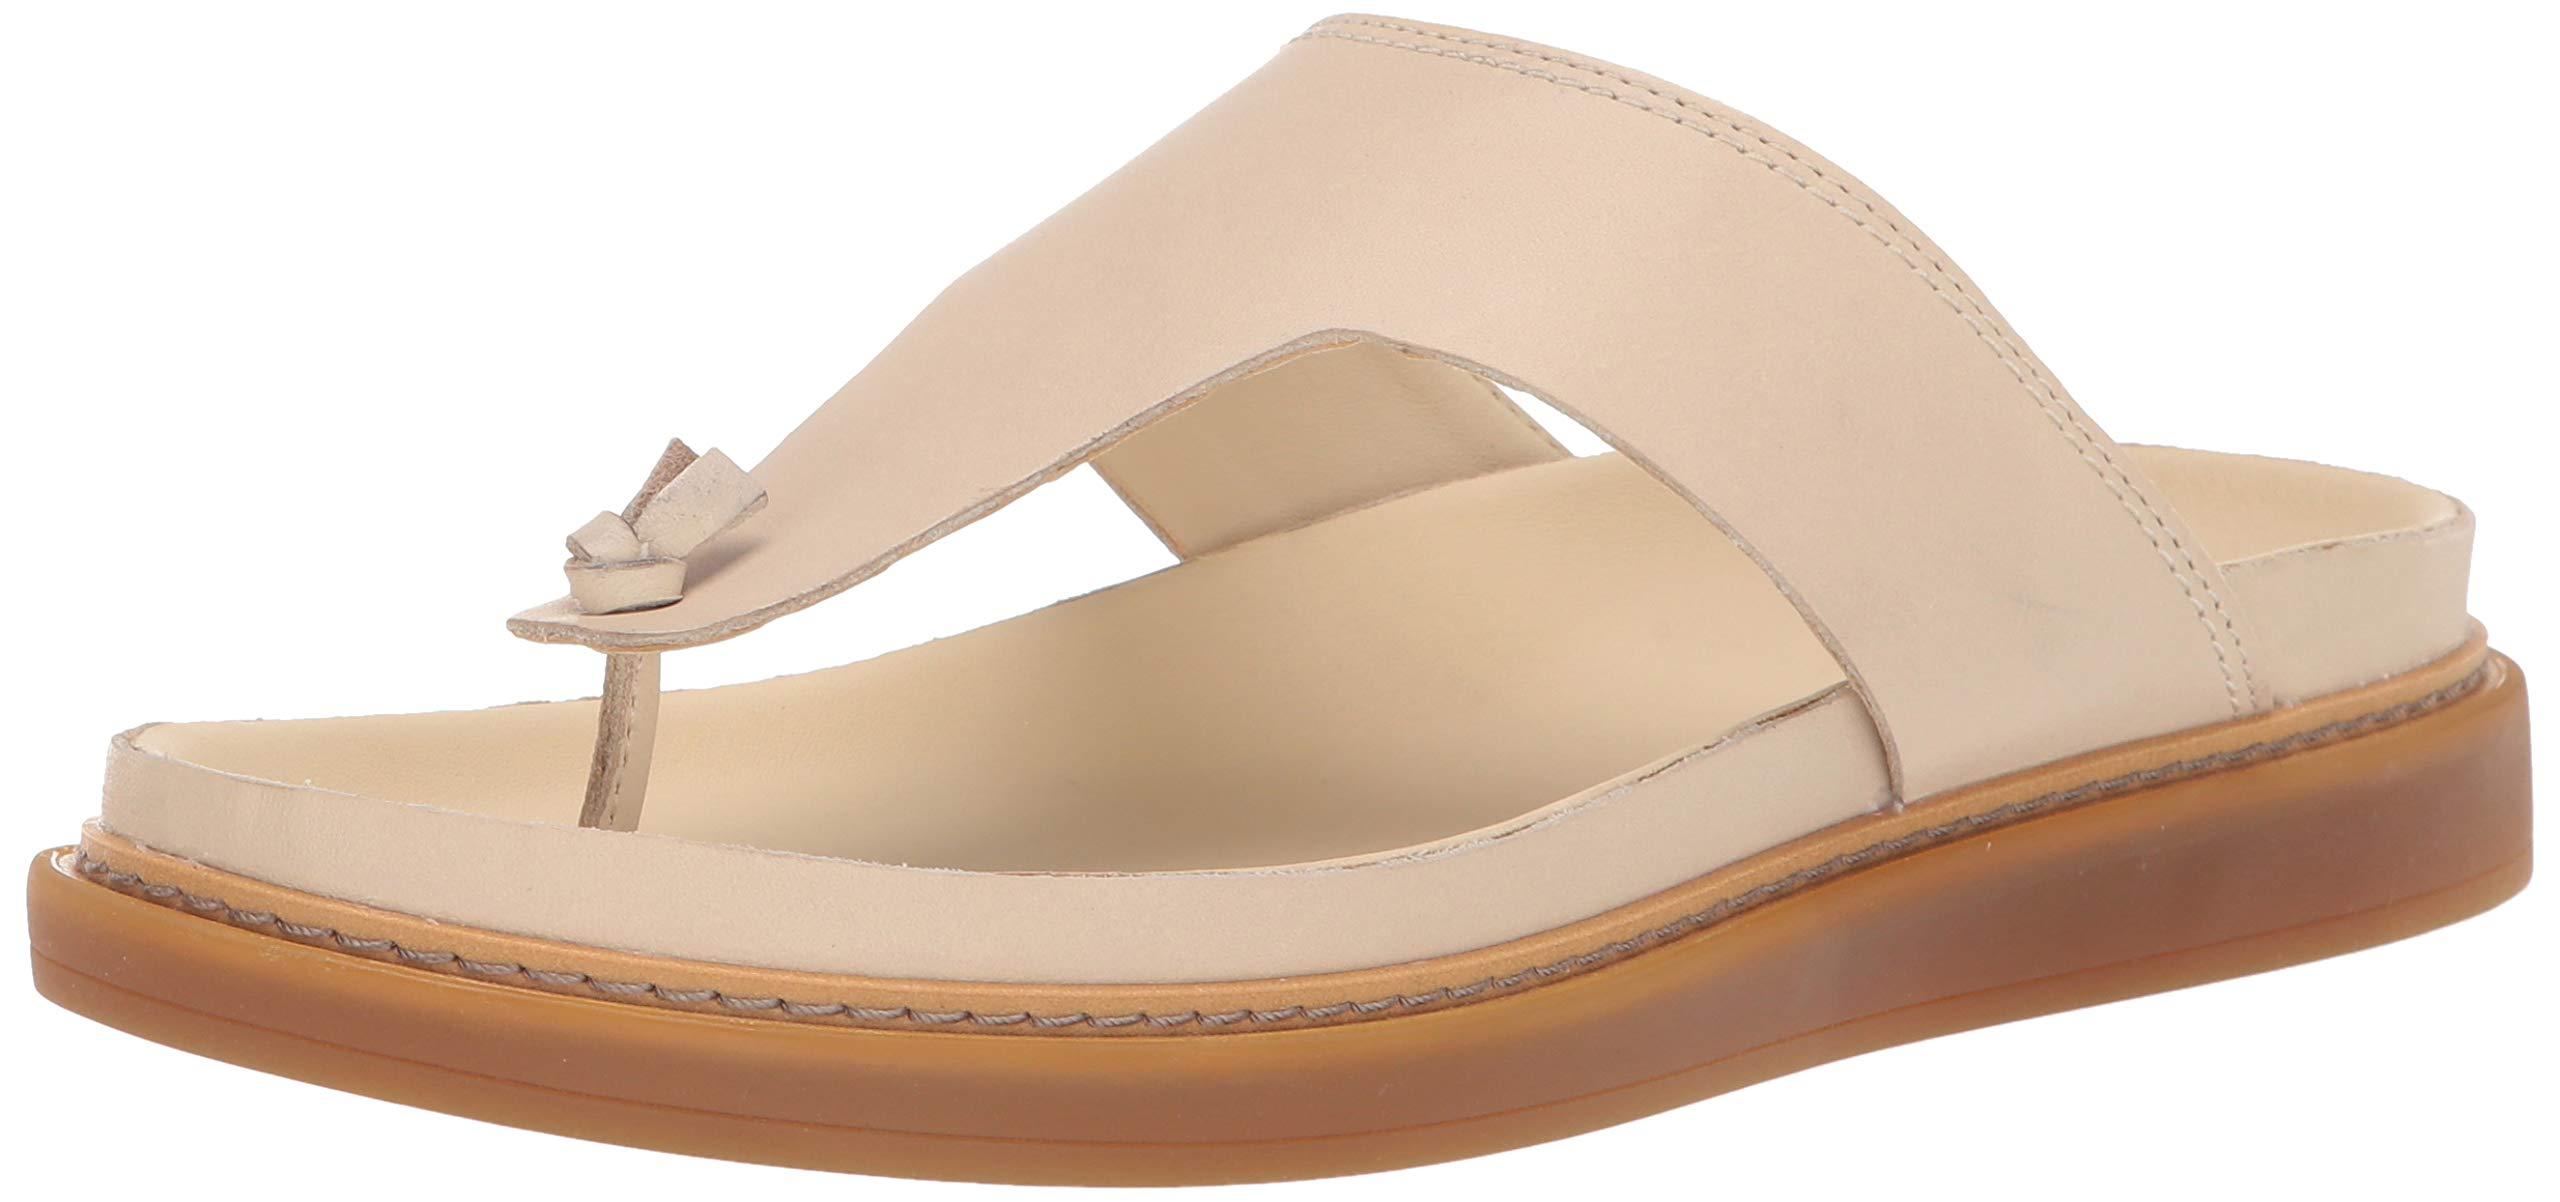 Clarks Leather Trace Shore Sandal in Cream Leather (Natural) - Save 65% |  Lyst